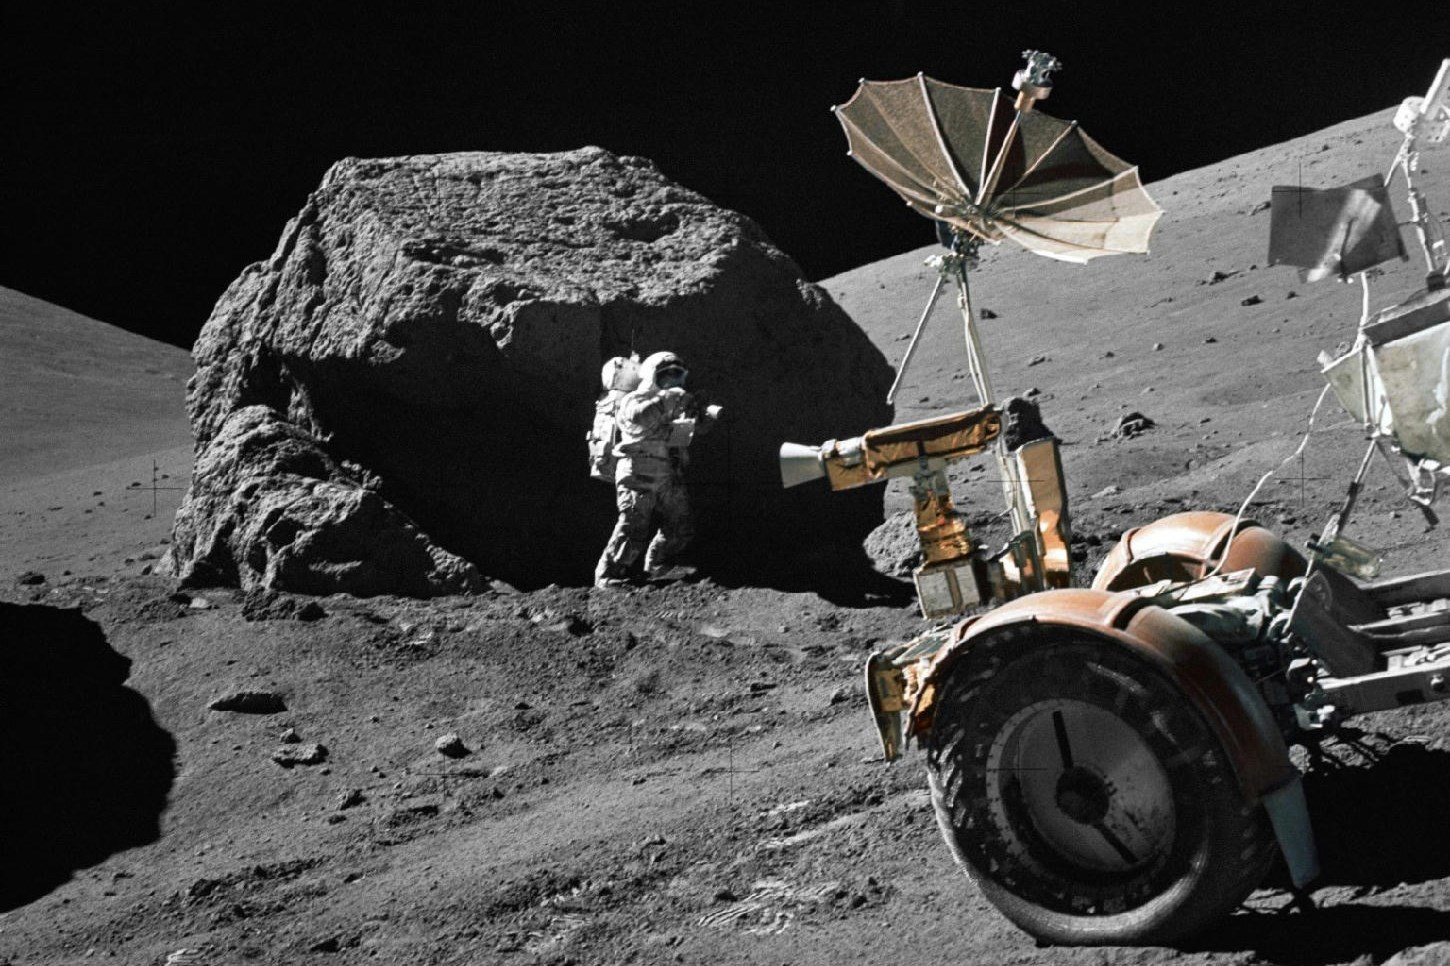 Technology: Moonquakes recorded 47 years ago have been reexamined, and now it has been shown that they were not natural